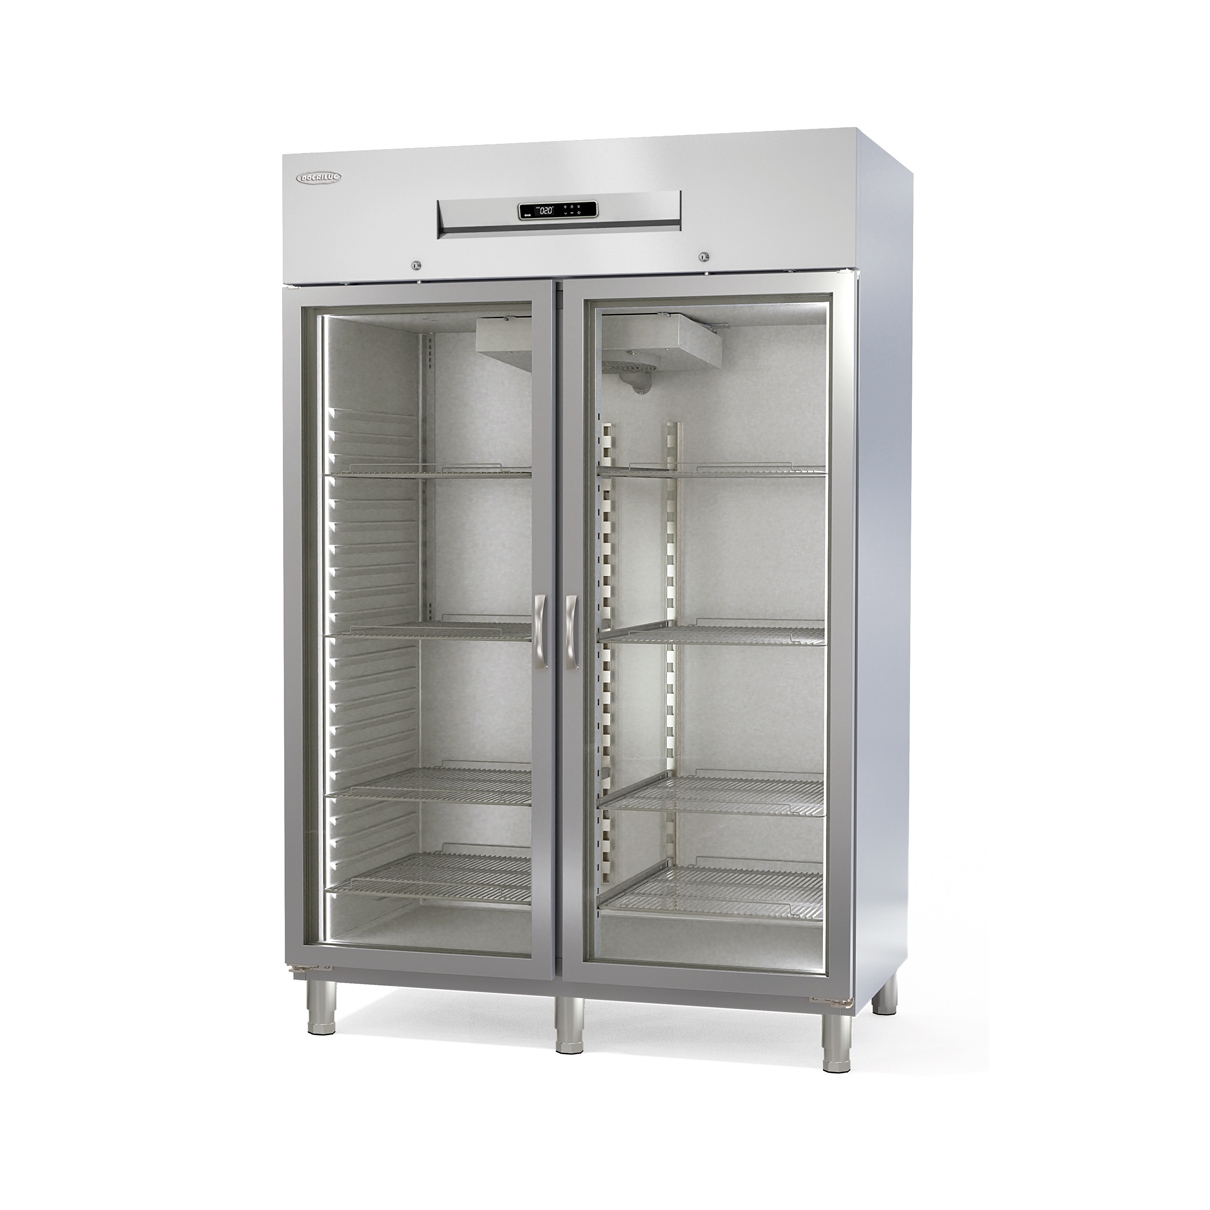 Gastronorm 2/1 Refrigerated Cabinet ARGV-140-2